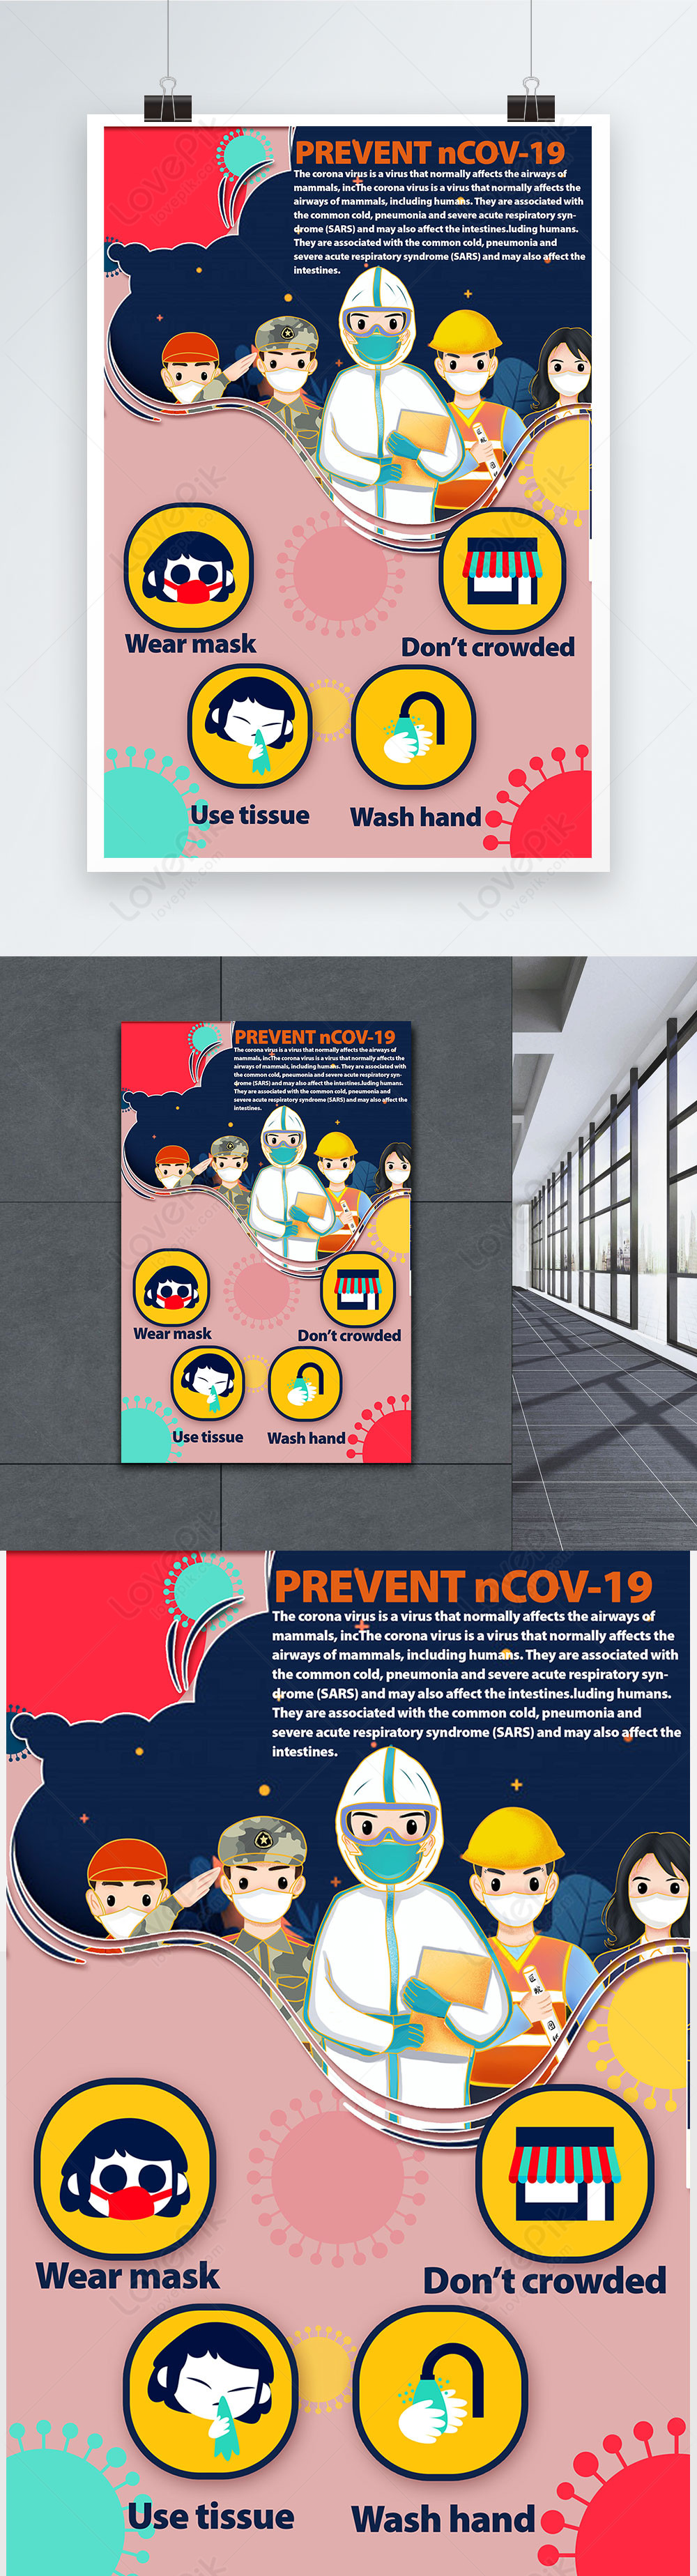 Coronavirus protect yourself poster template image_picture free